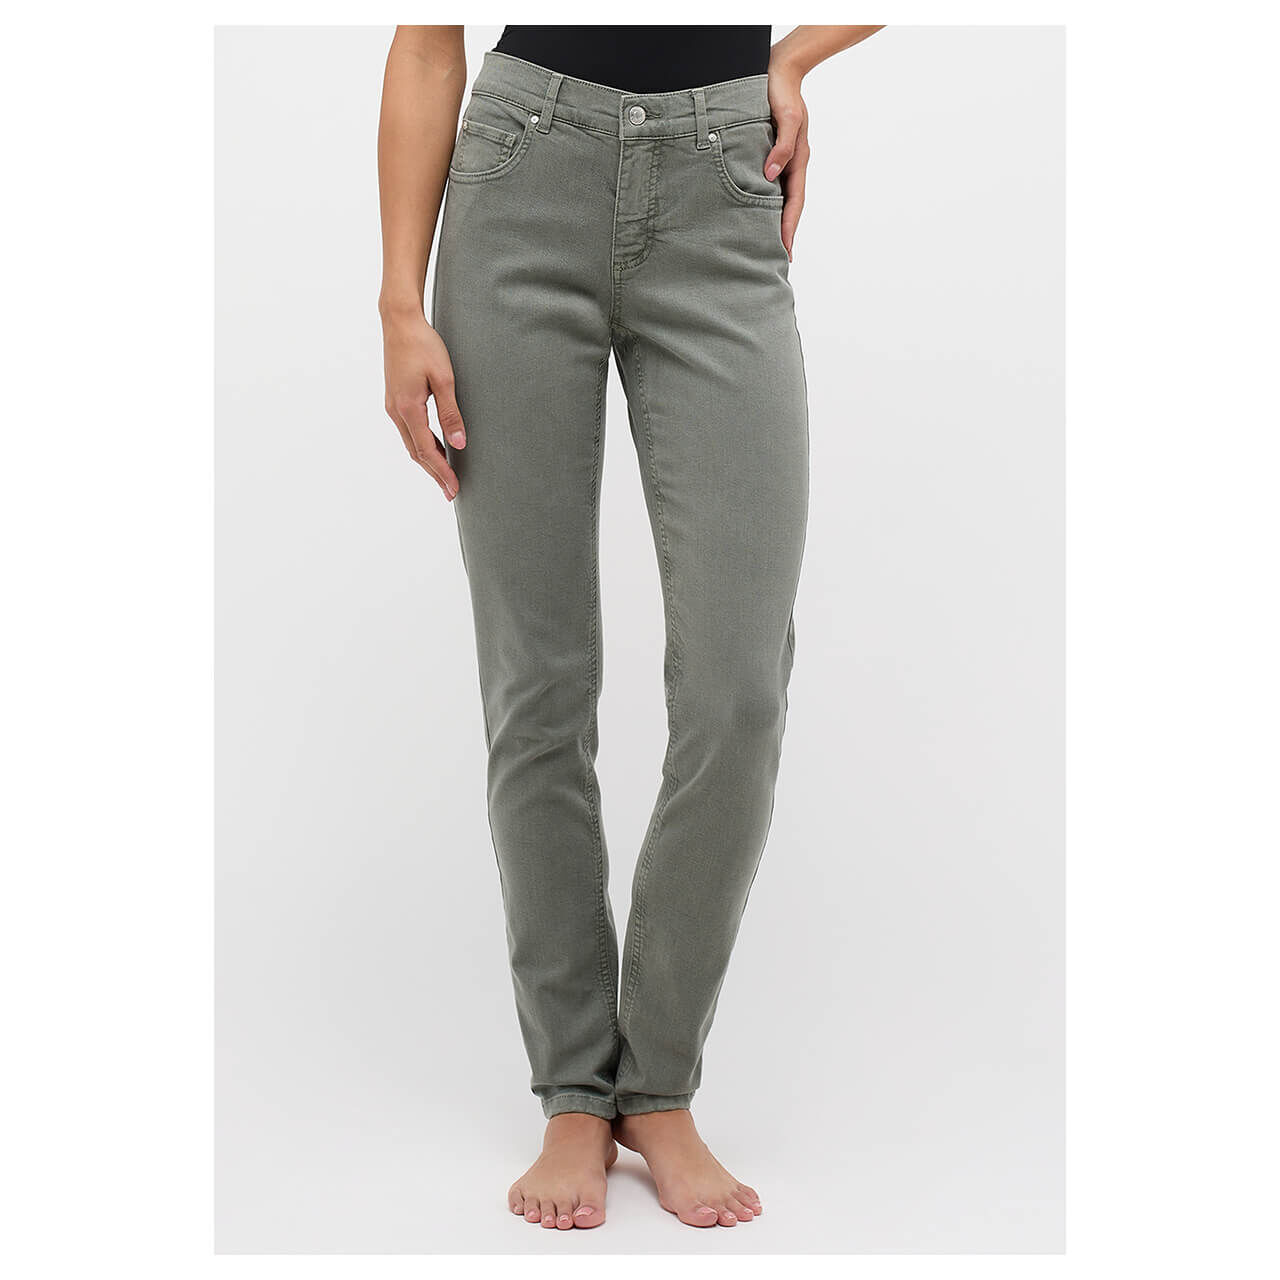 Angels Skinny Jeans past olive used